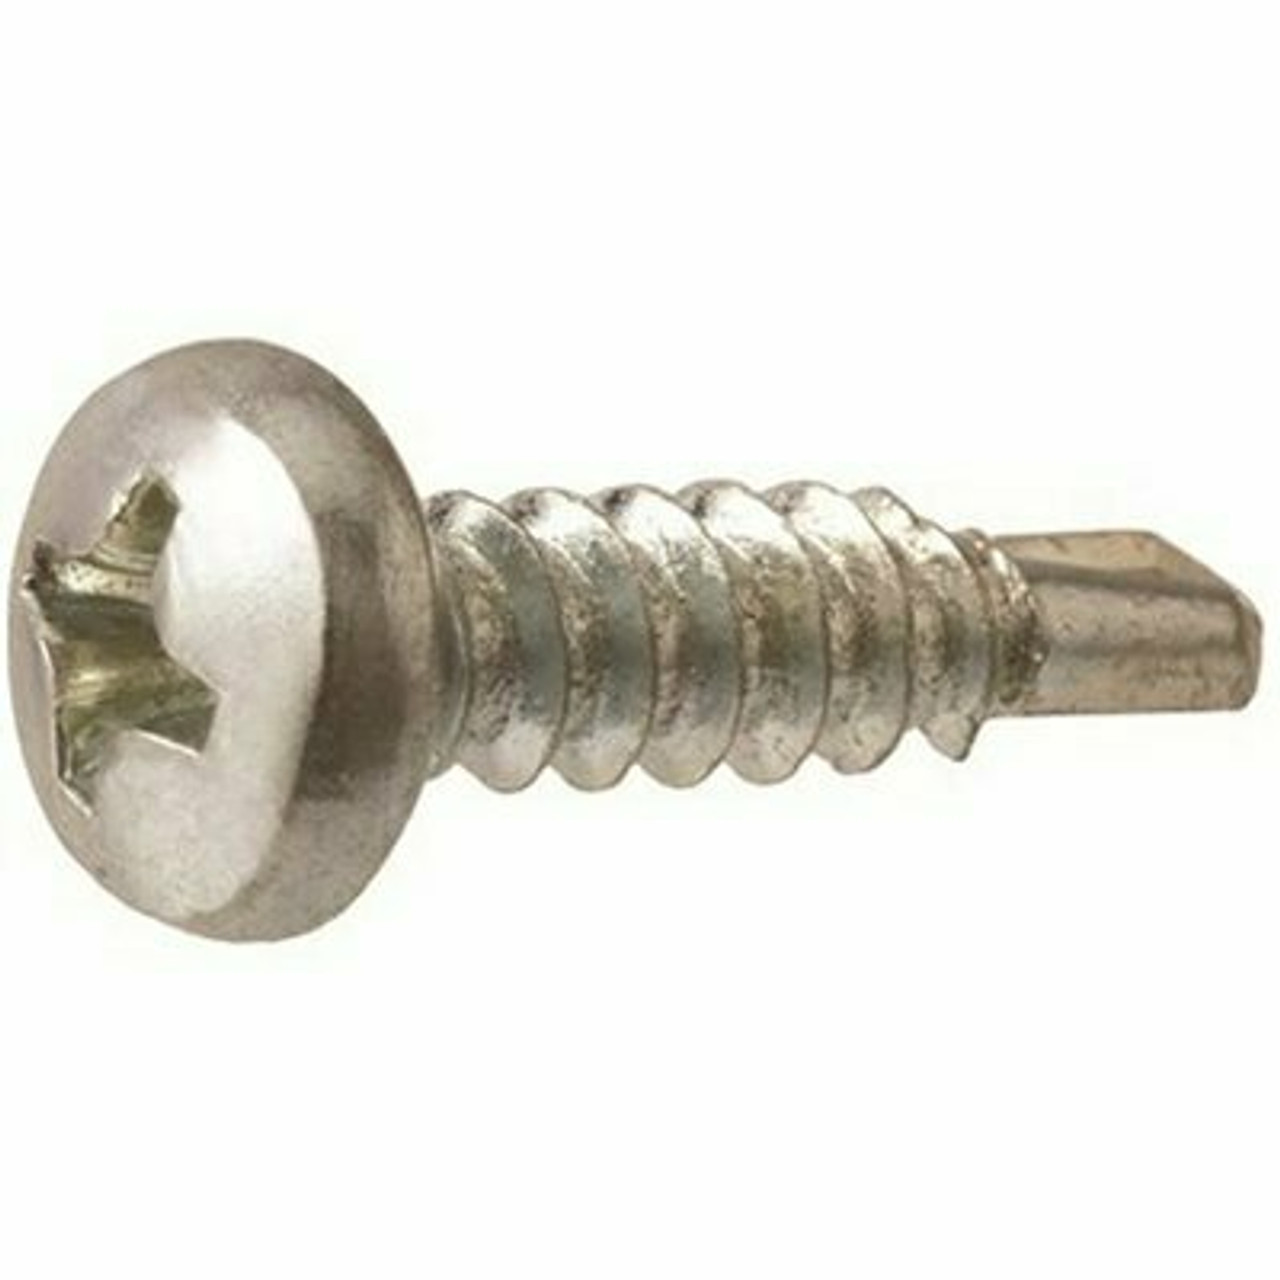 Crown Bolt #10-16 X 1/2 In. Pan Head Phillips Self-Drilling Screw (30-Pack)